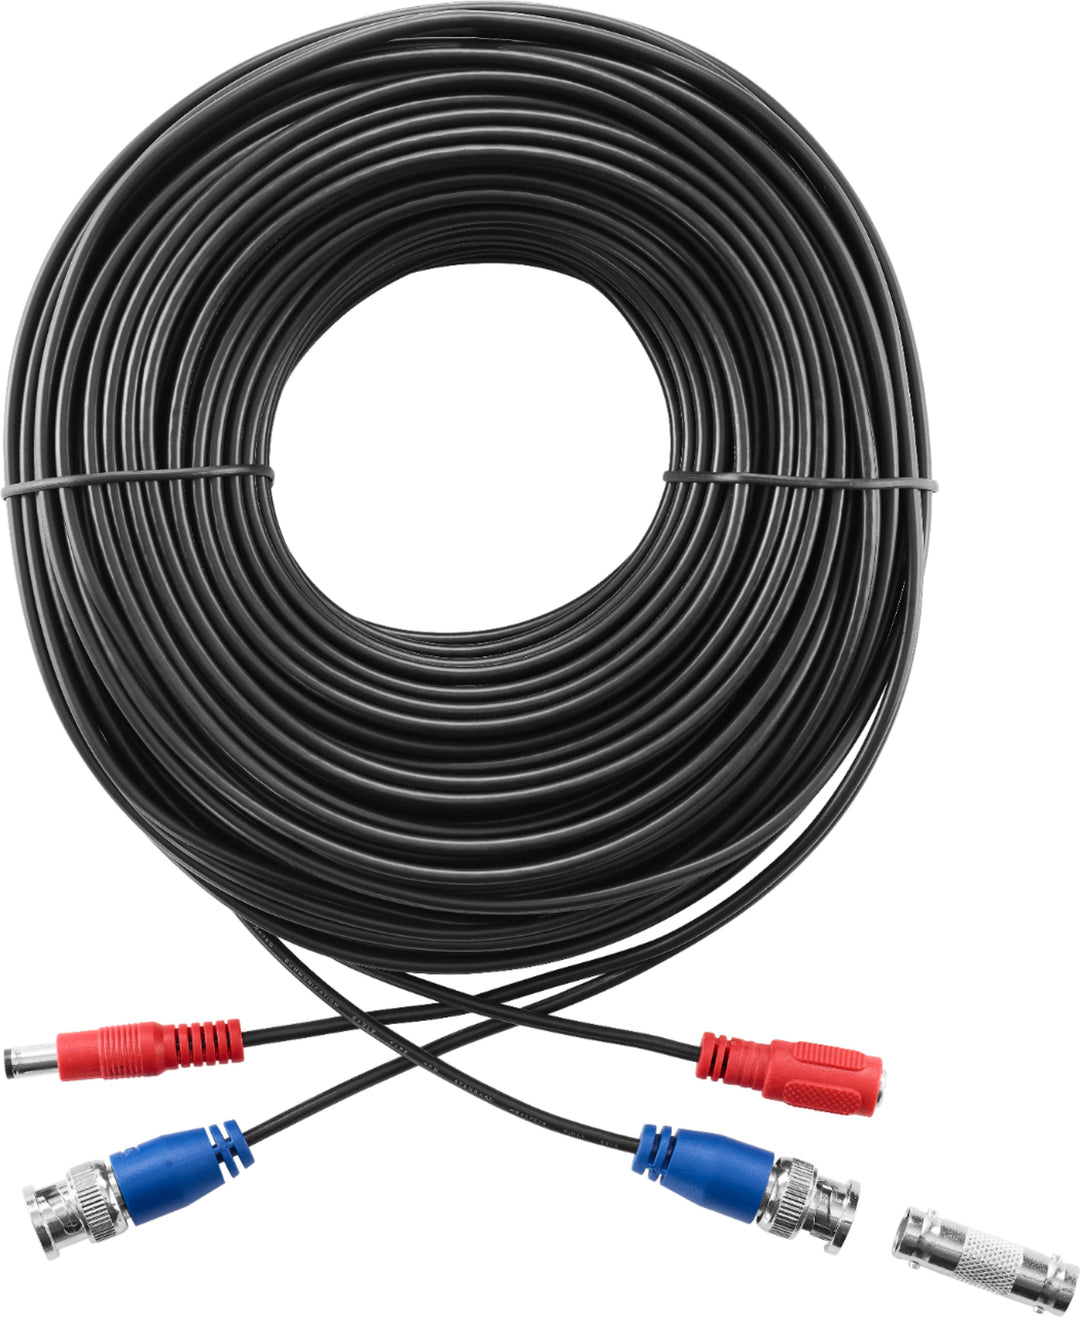 Insignia™ - 100' 4K In-Wall Premium Video/Power Security Cable - Black_3